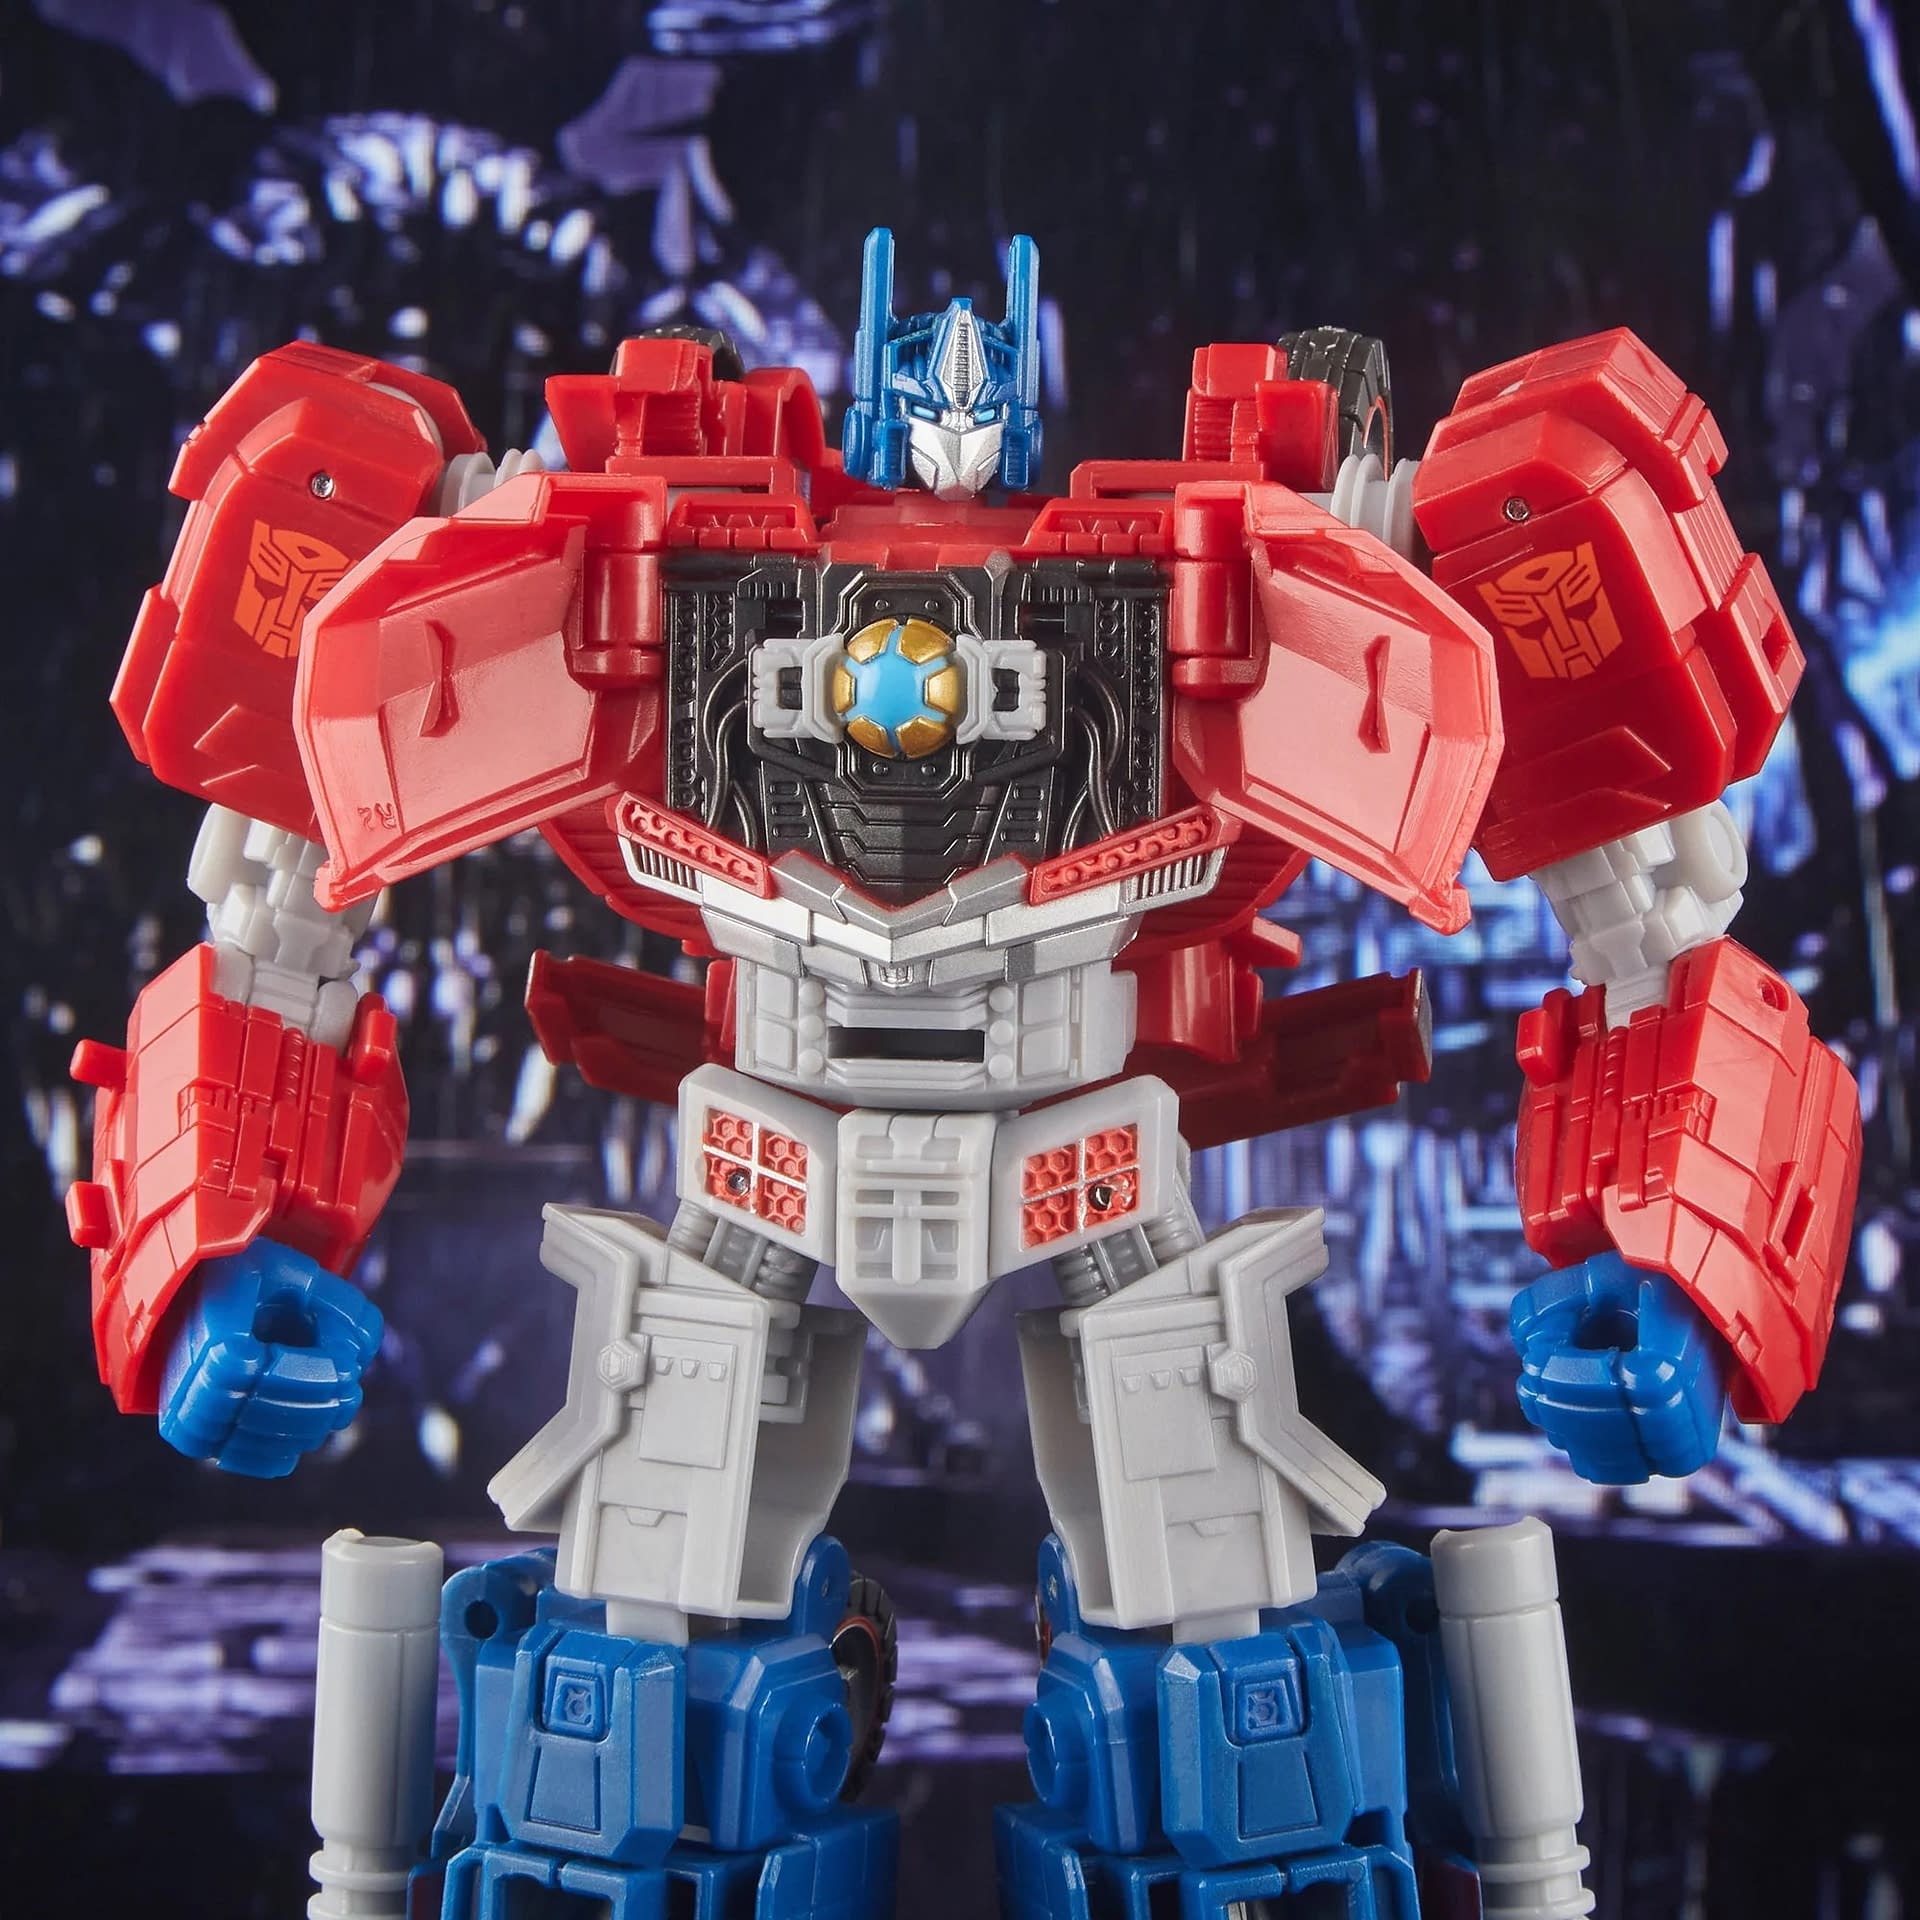 Transformers Optimus Prime Gamer Edition Figure Revealed by Hasbro 